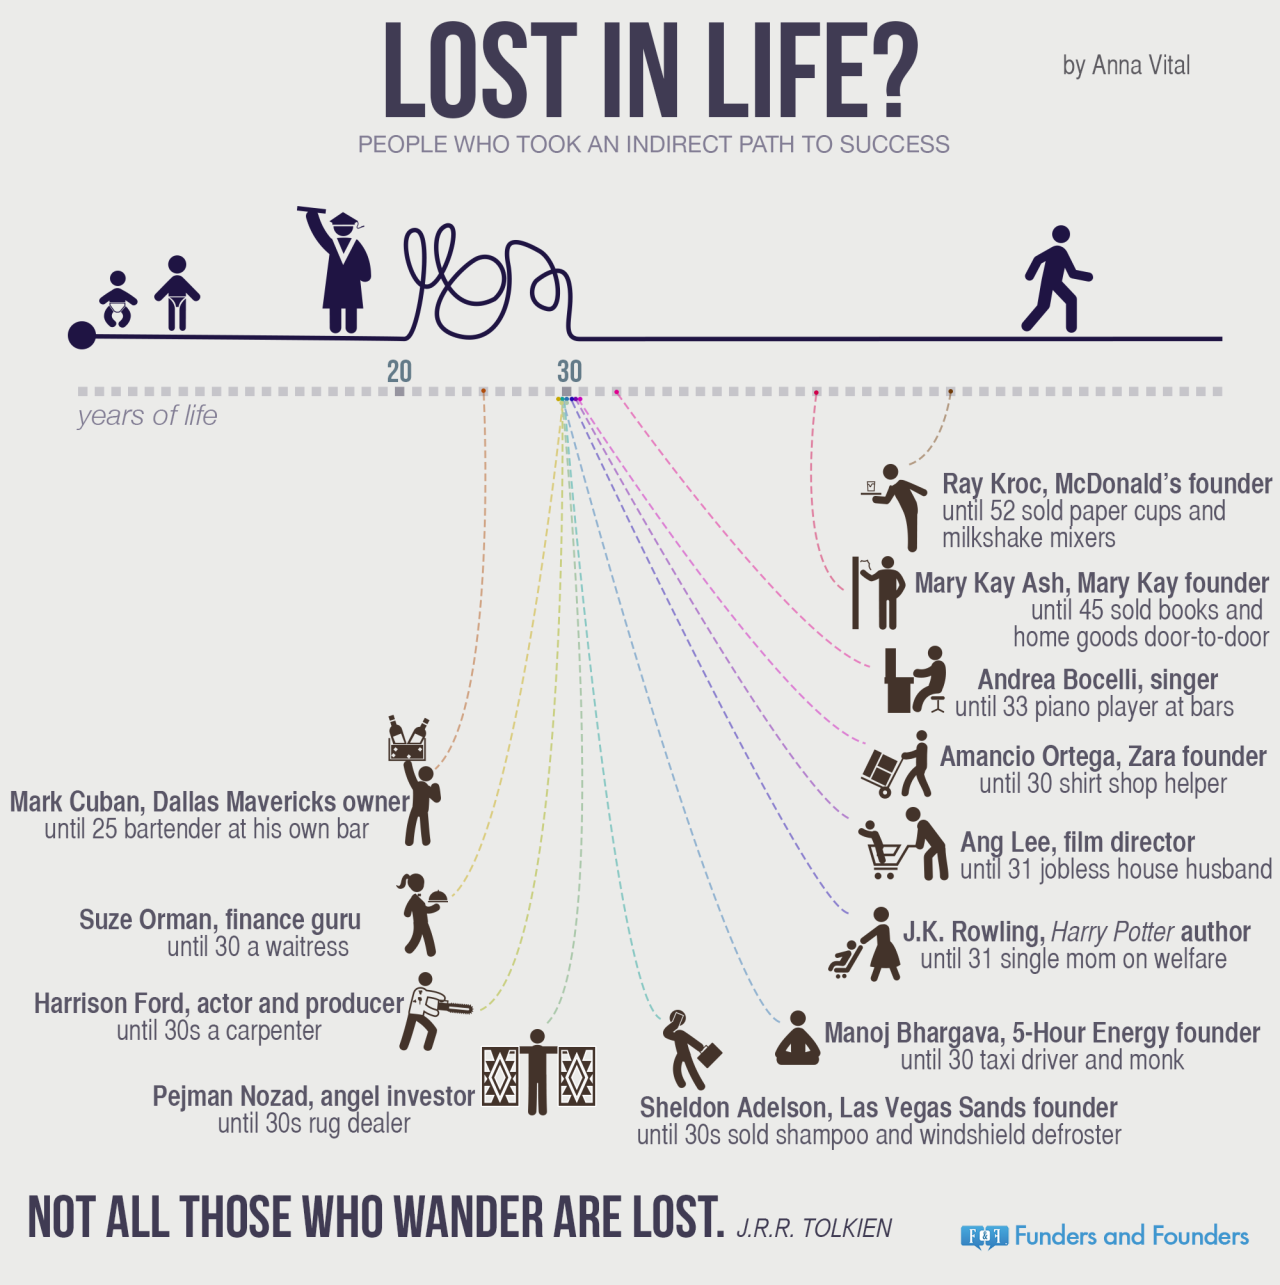 lost-in-life-people-who-took-indirect-path-to-success-infographic